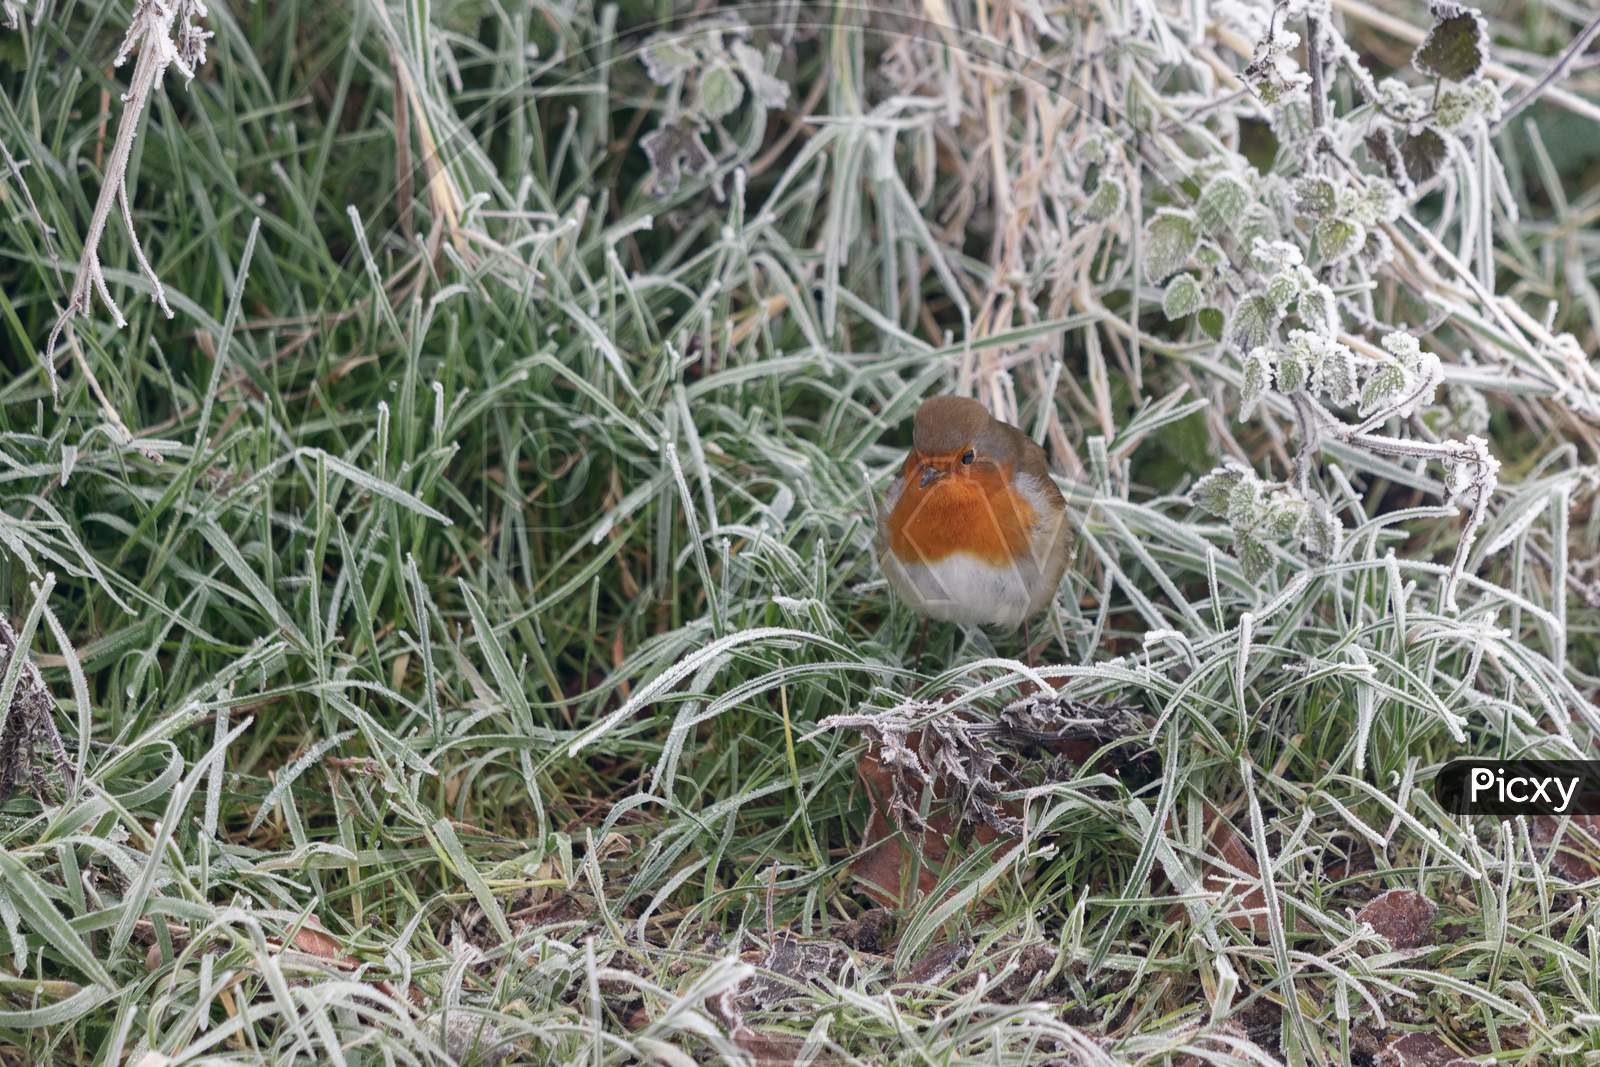 Close-Up Of An Alert Robin Standing In Grass Covered With Hoar Frost On A Winters Morning